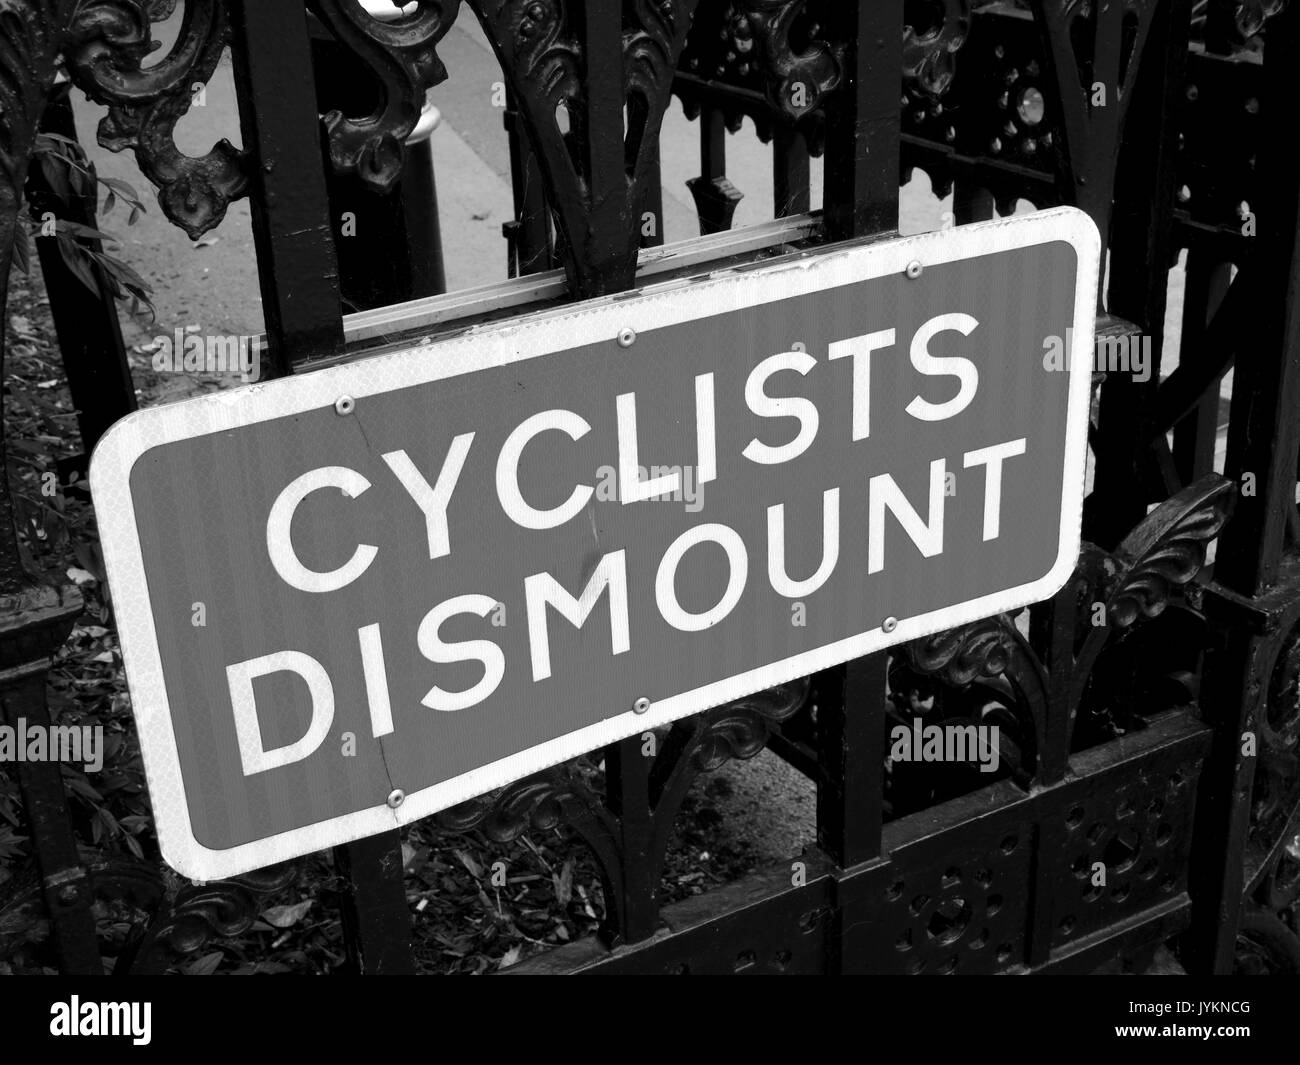 Cyclist dismount highway information sign mounted on iron railings Stock Photo